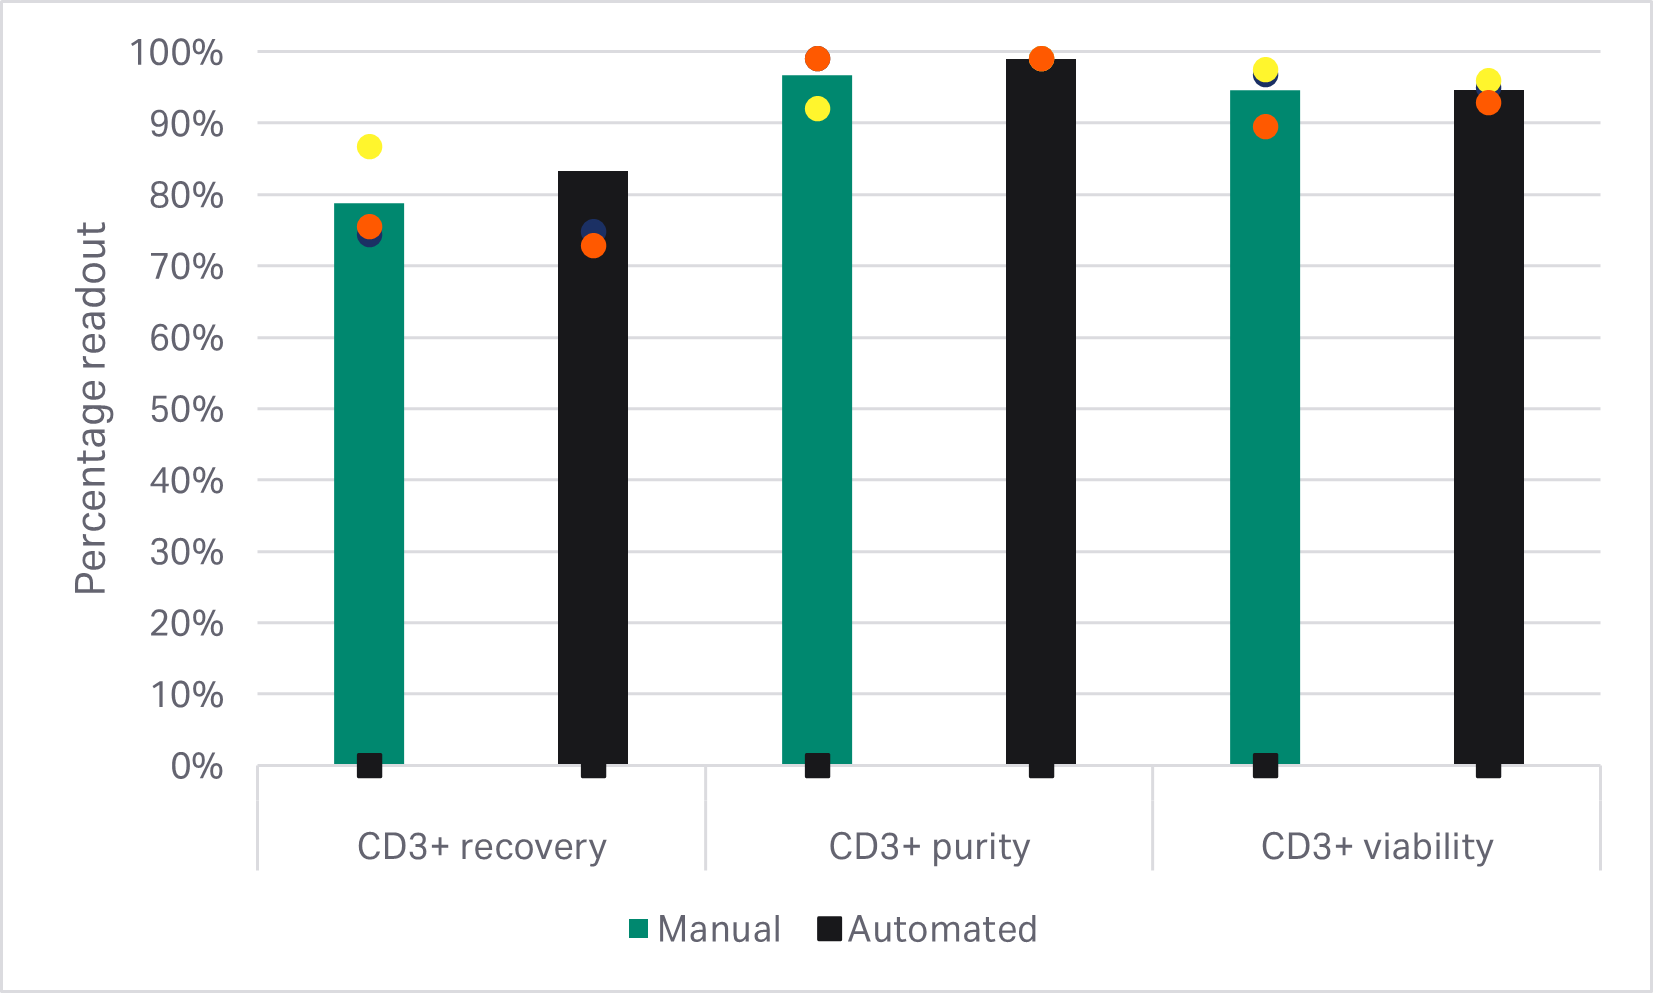 CAR T cell manufacturing. Recovery, purity, and viability of enriched T cells after CD3-positive selection and release.